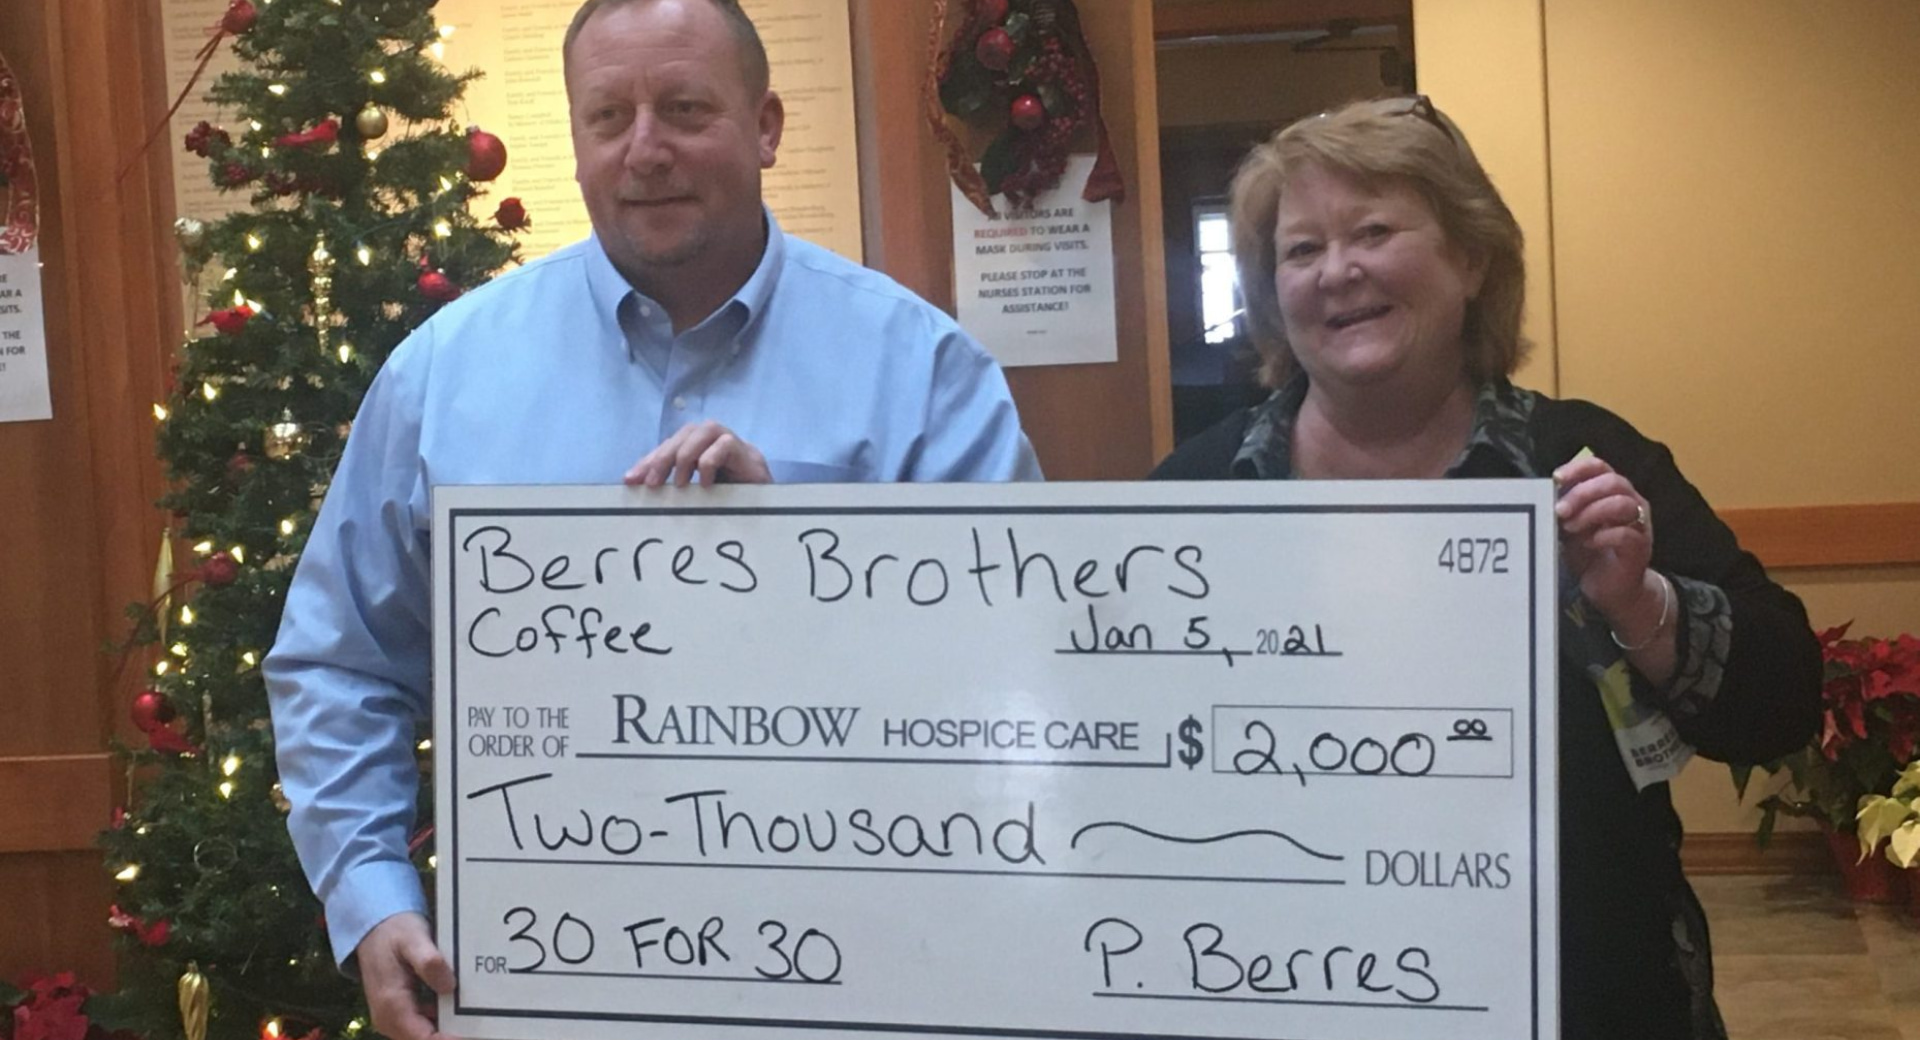 Rainbow Hospice Care Receives Check From Berres Brothers